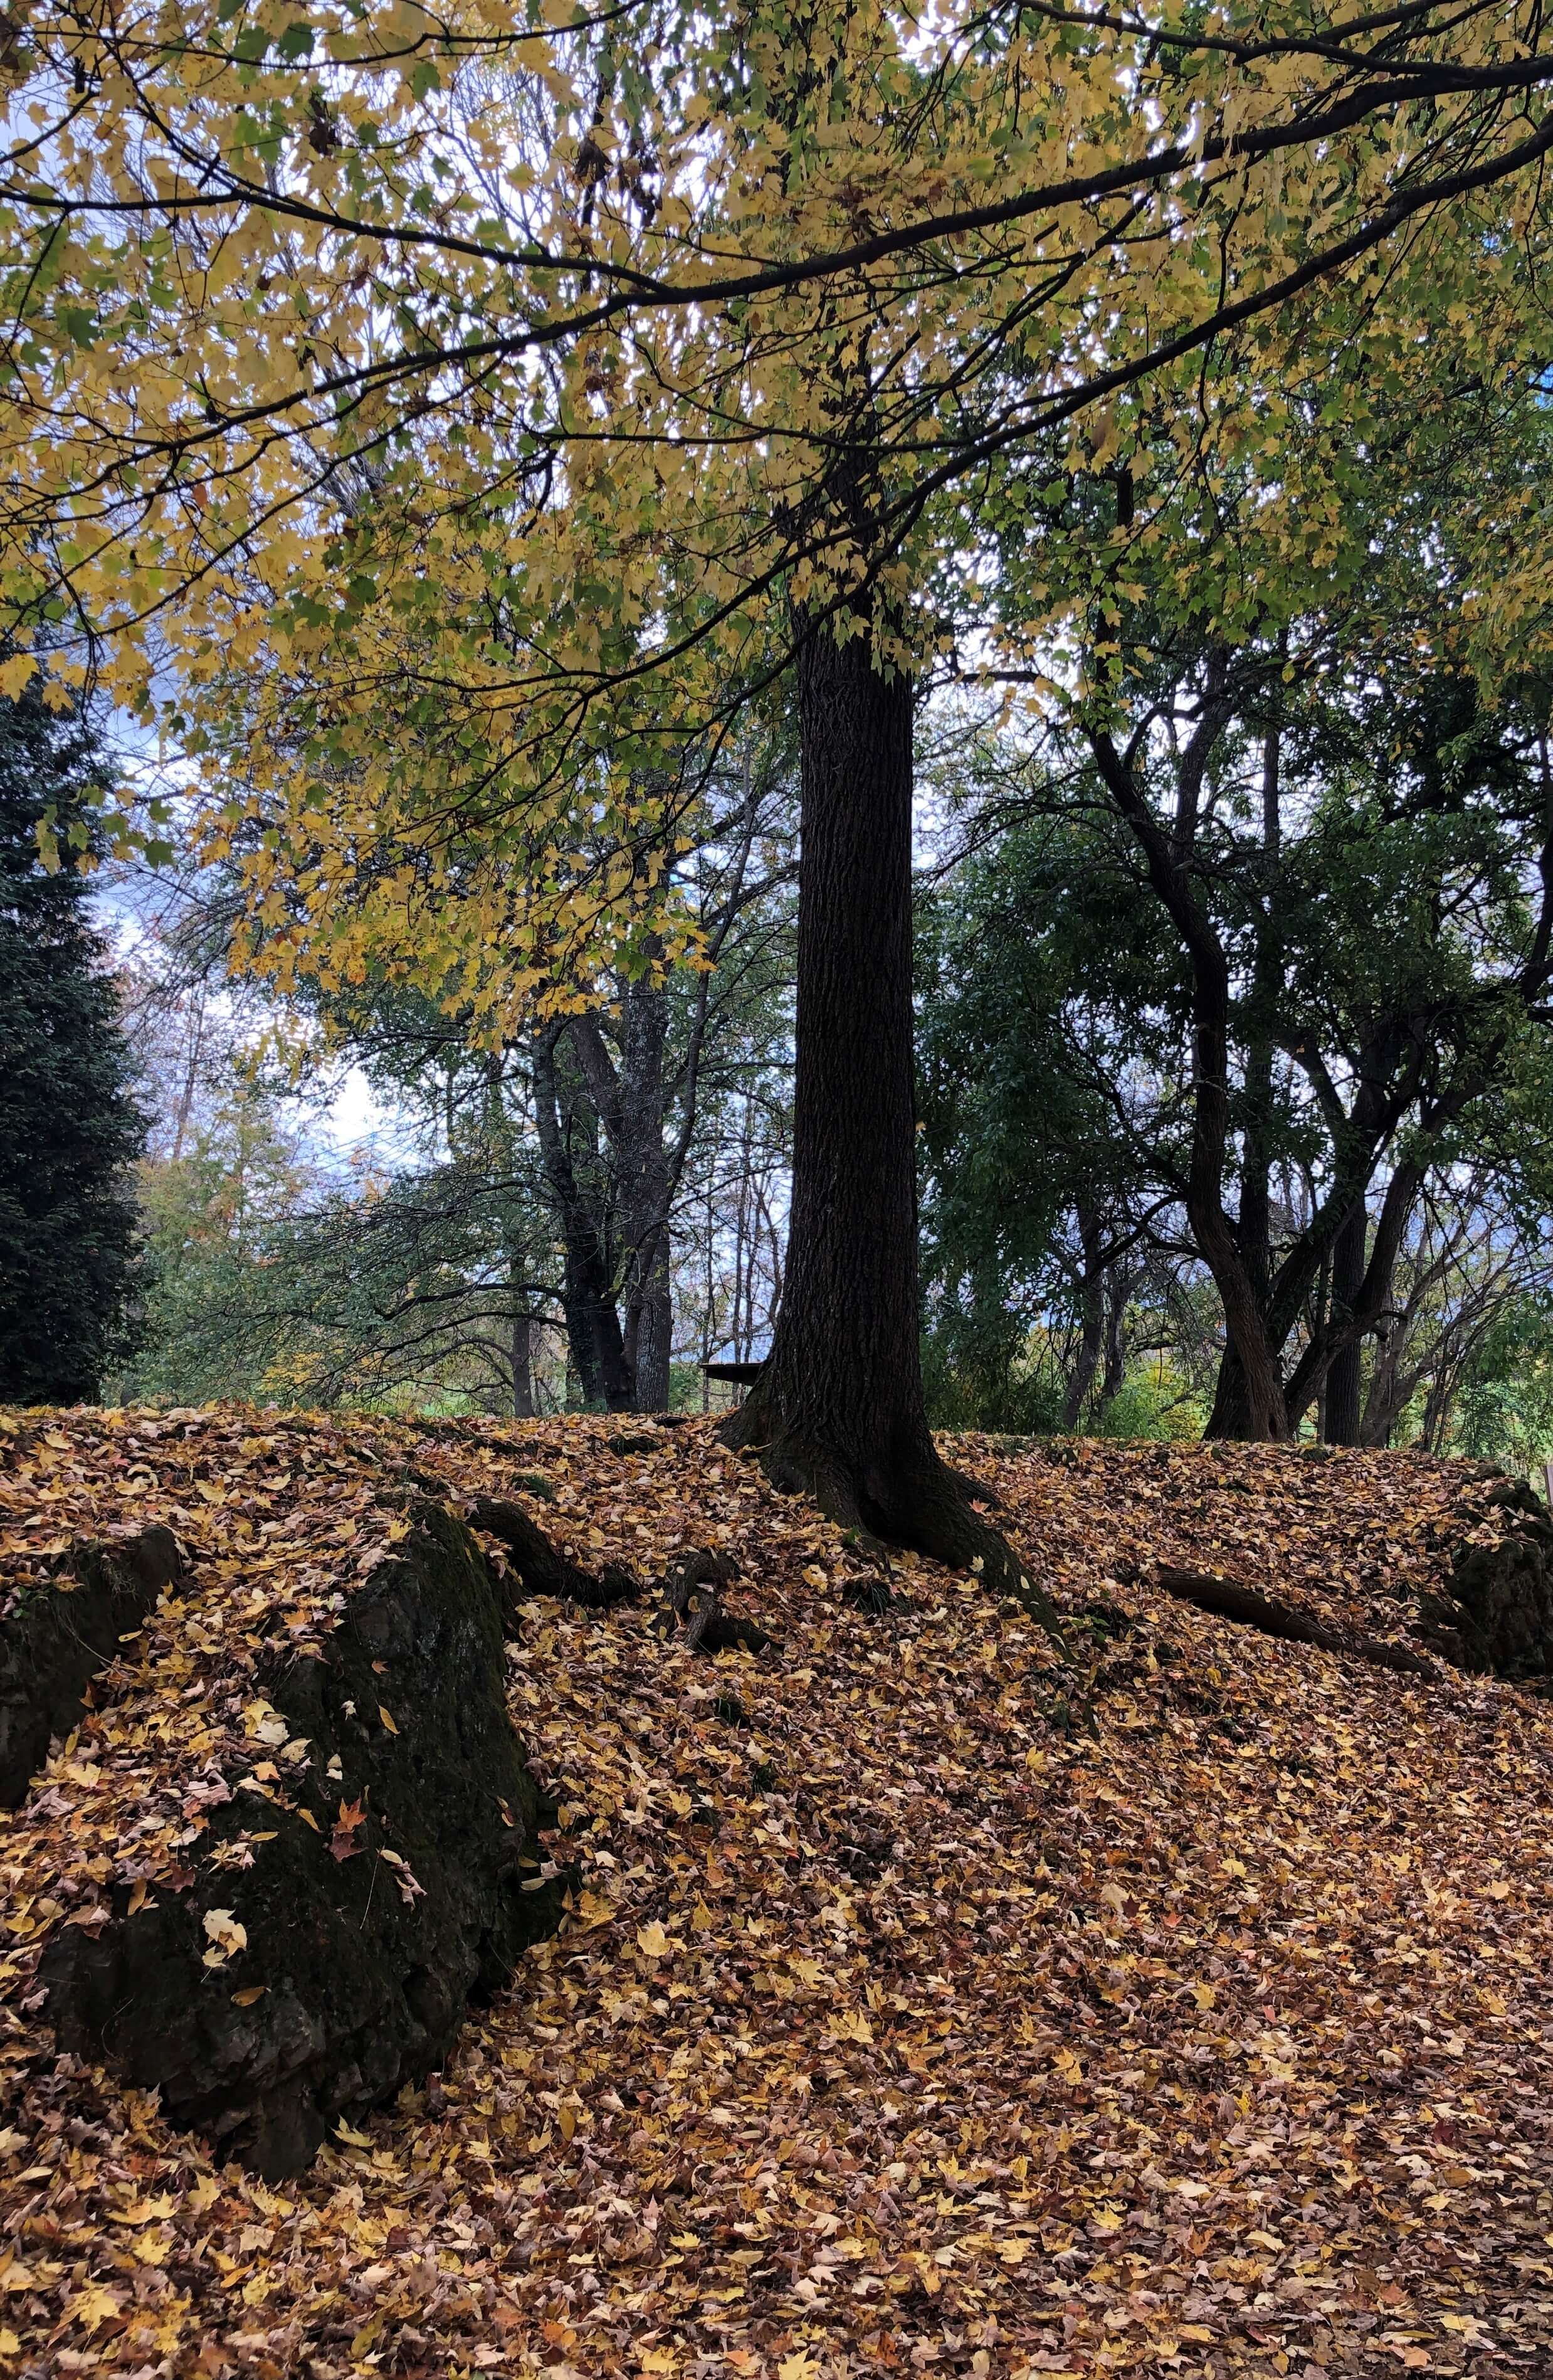 the ground below a tree is almost completely covered in leaves (except for one boulder)